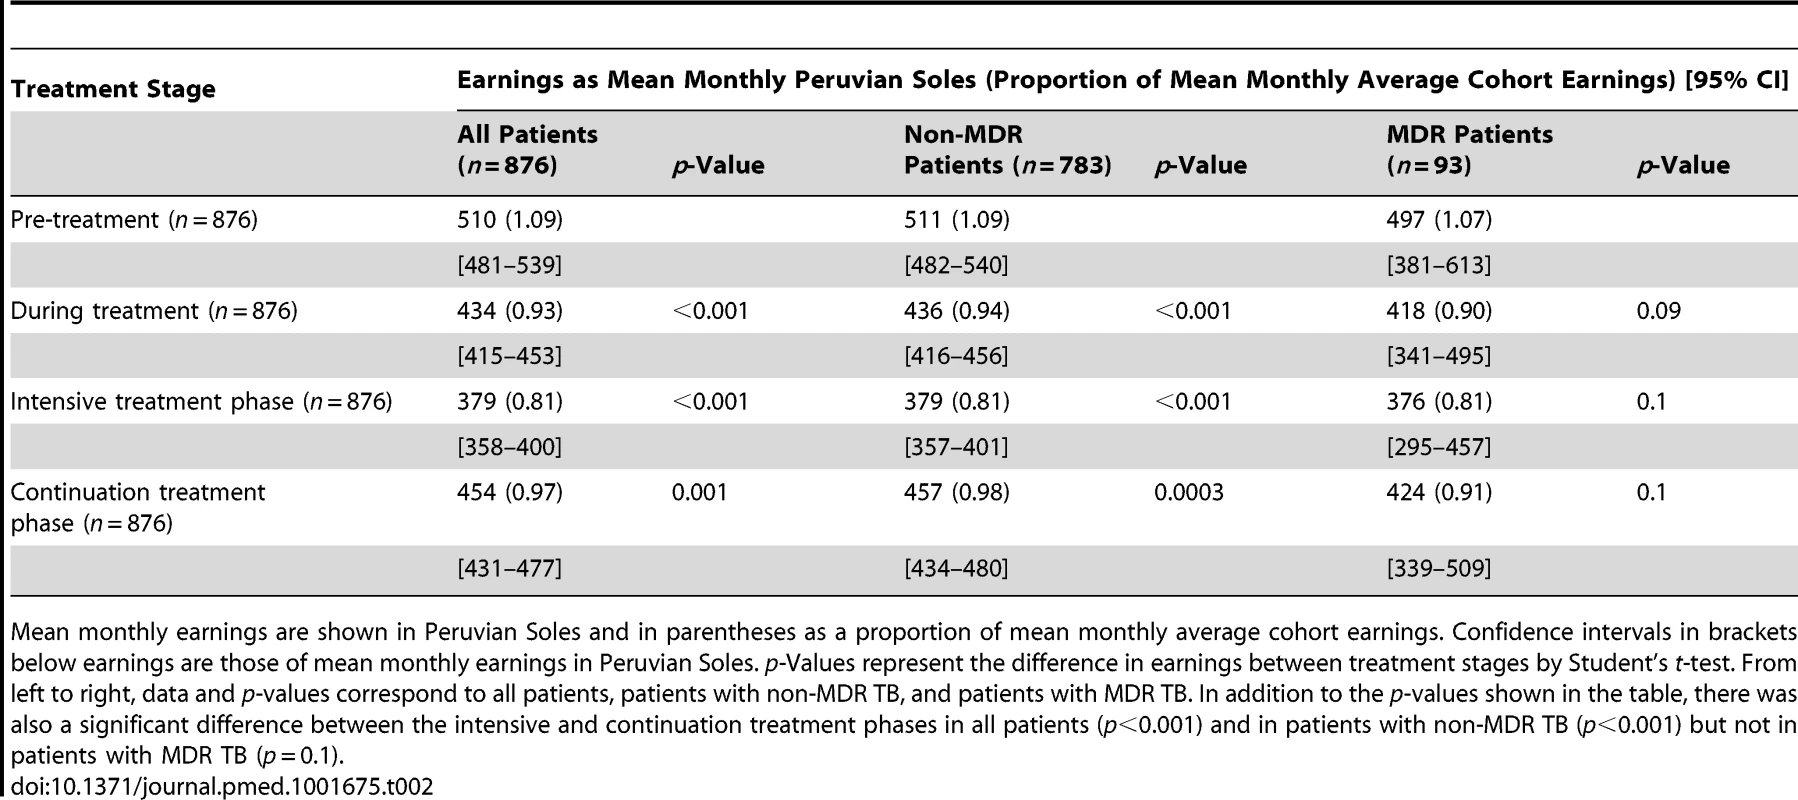 Comparison of mean monthly earnings of patient households by treatment stage.